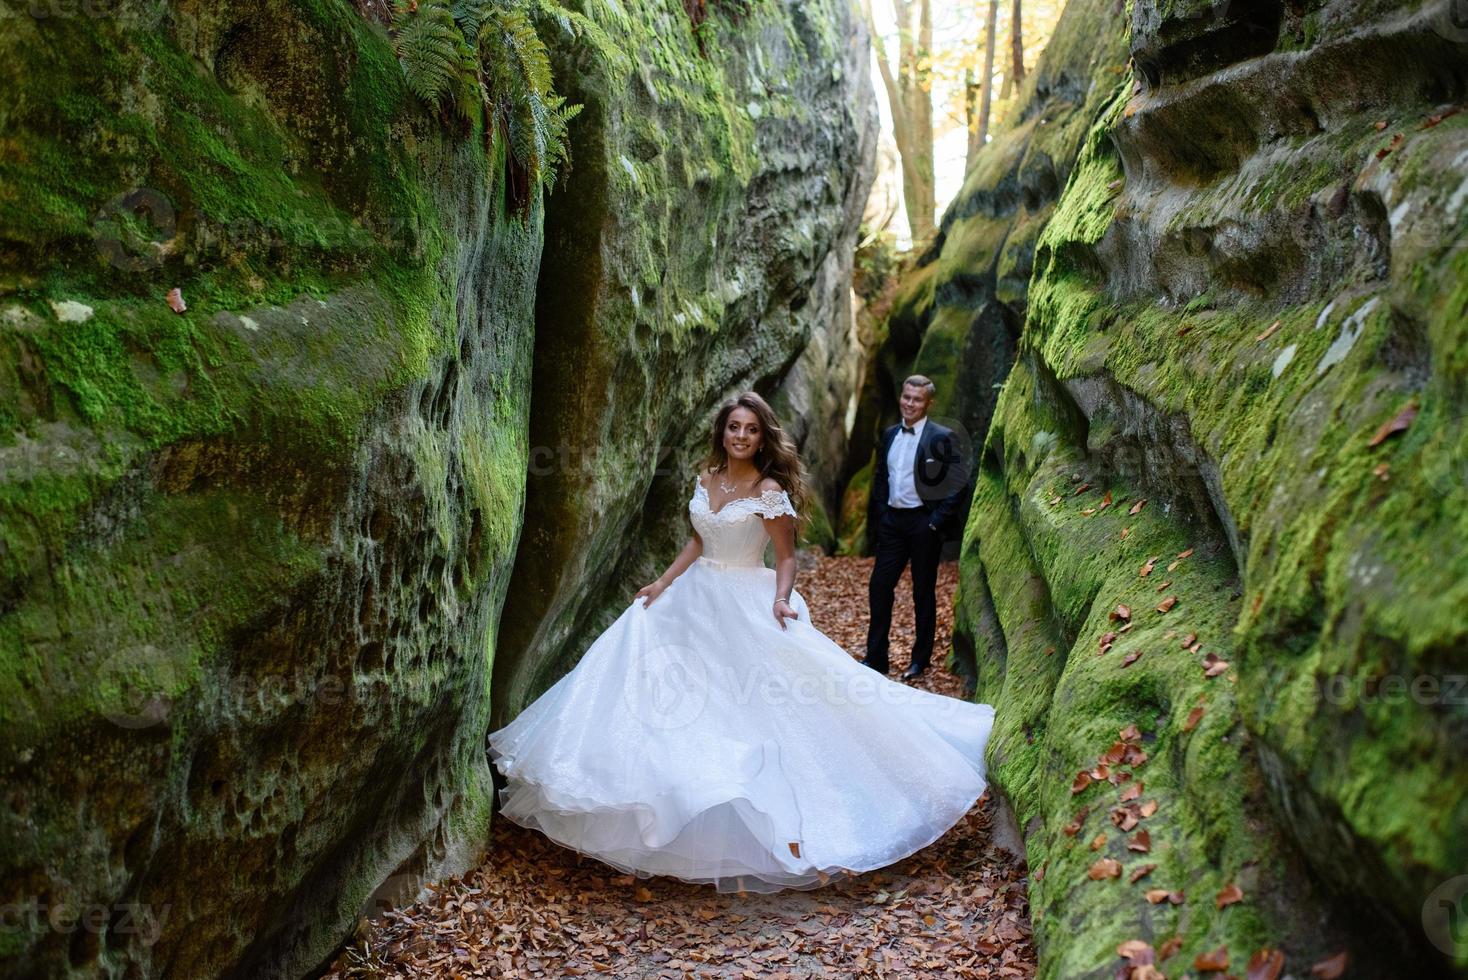 Bride and groom. A couple strolling among the narrow beautiful gorge. The gorge was overgrown with green moss. The newlyweds are spinning and running. photo